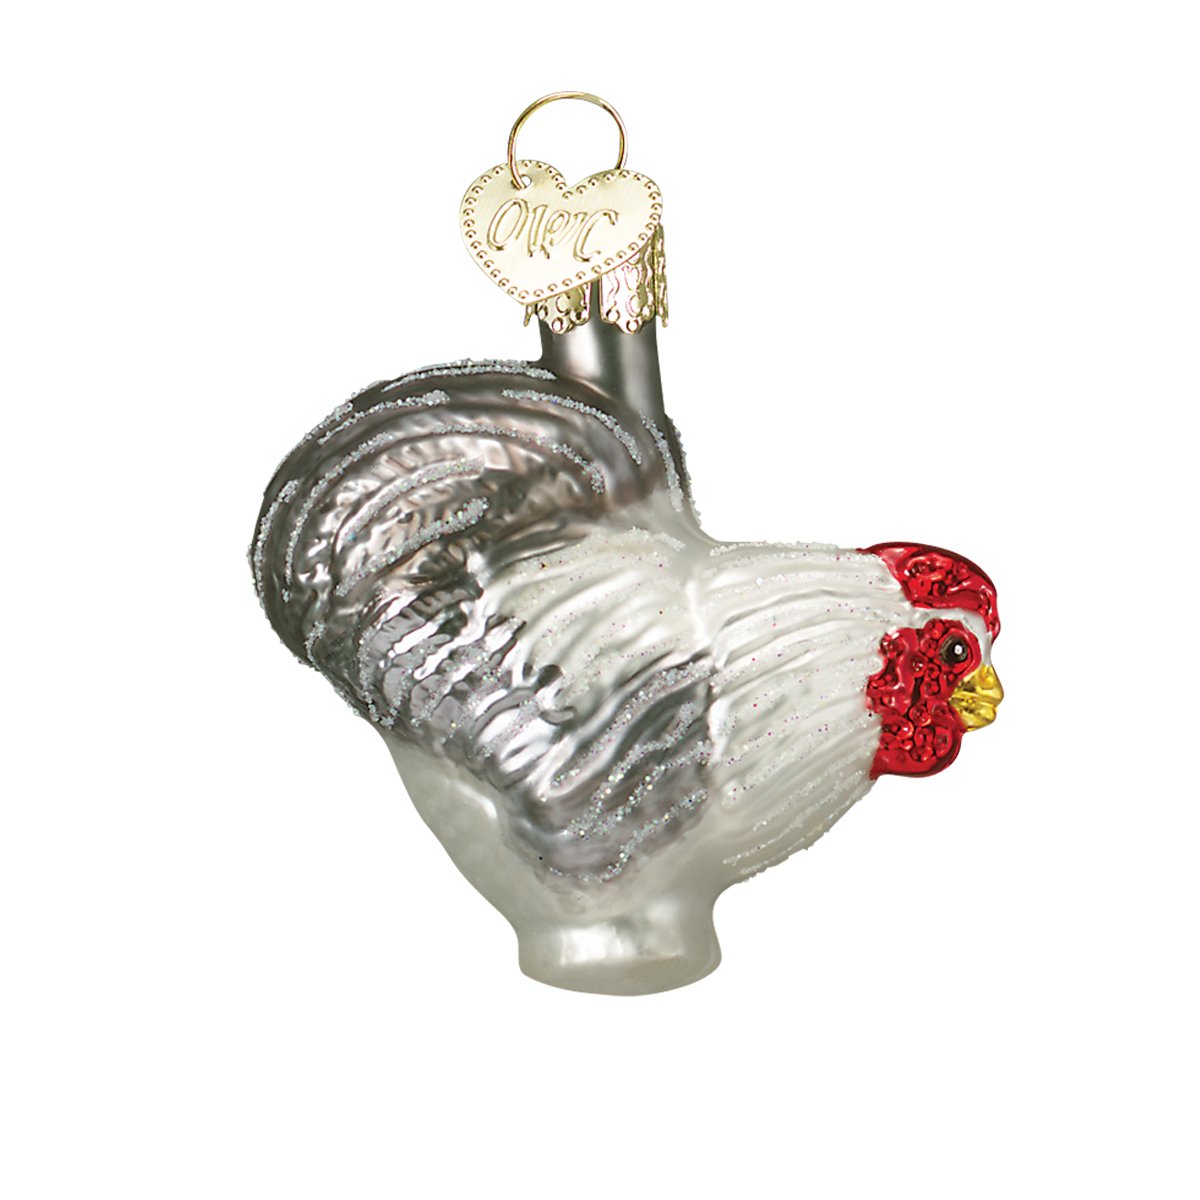 Old World Christmas - Mini White Rooster Ornament    